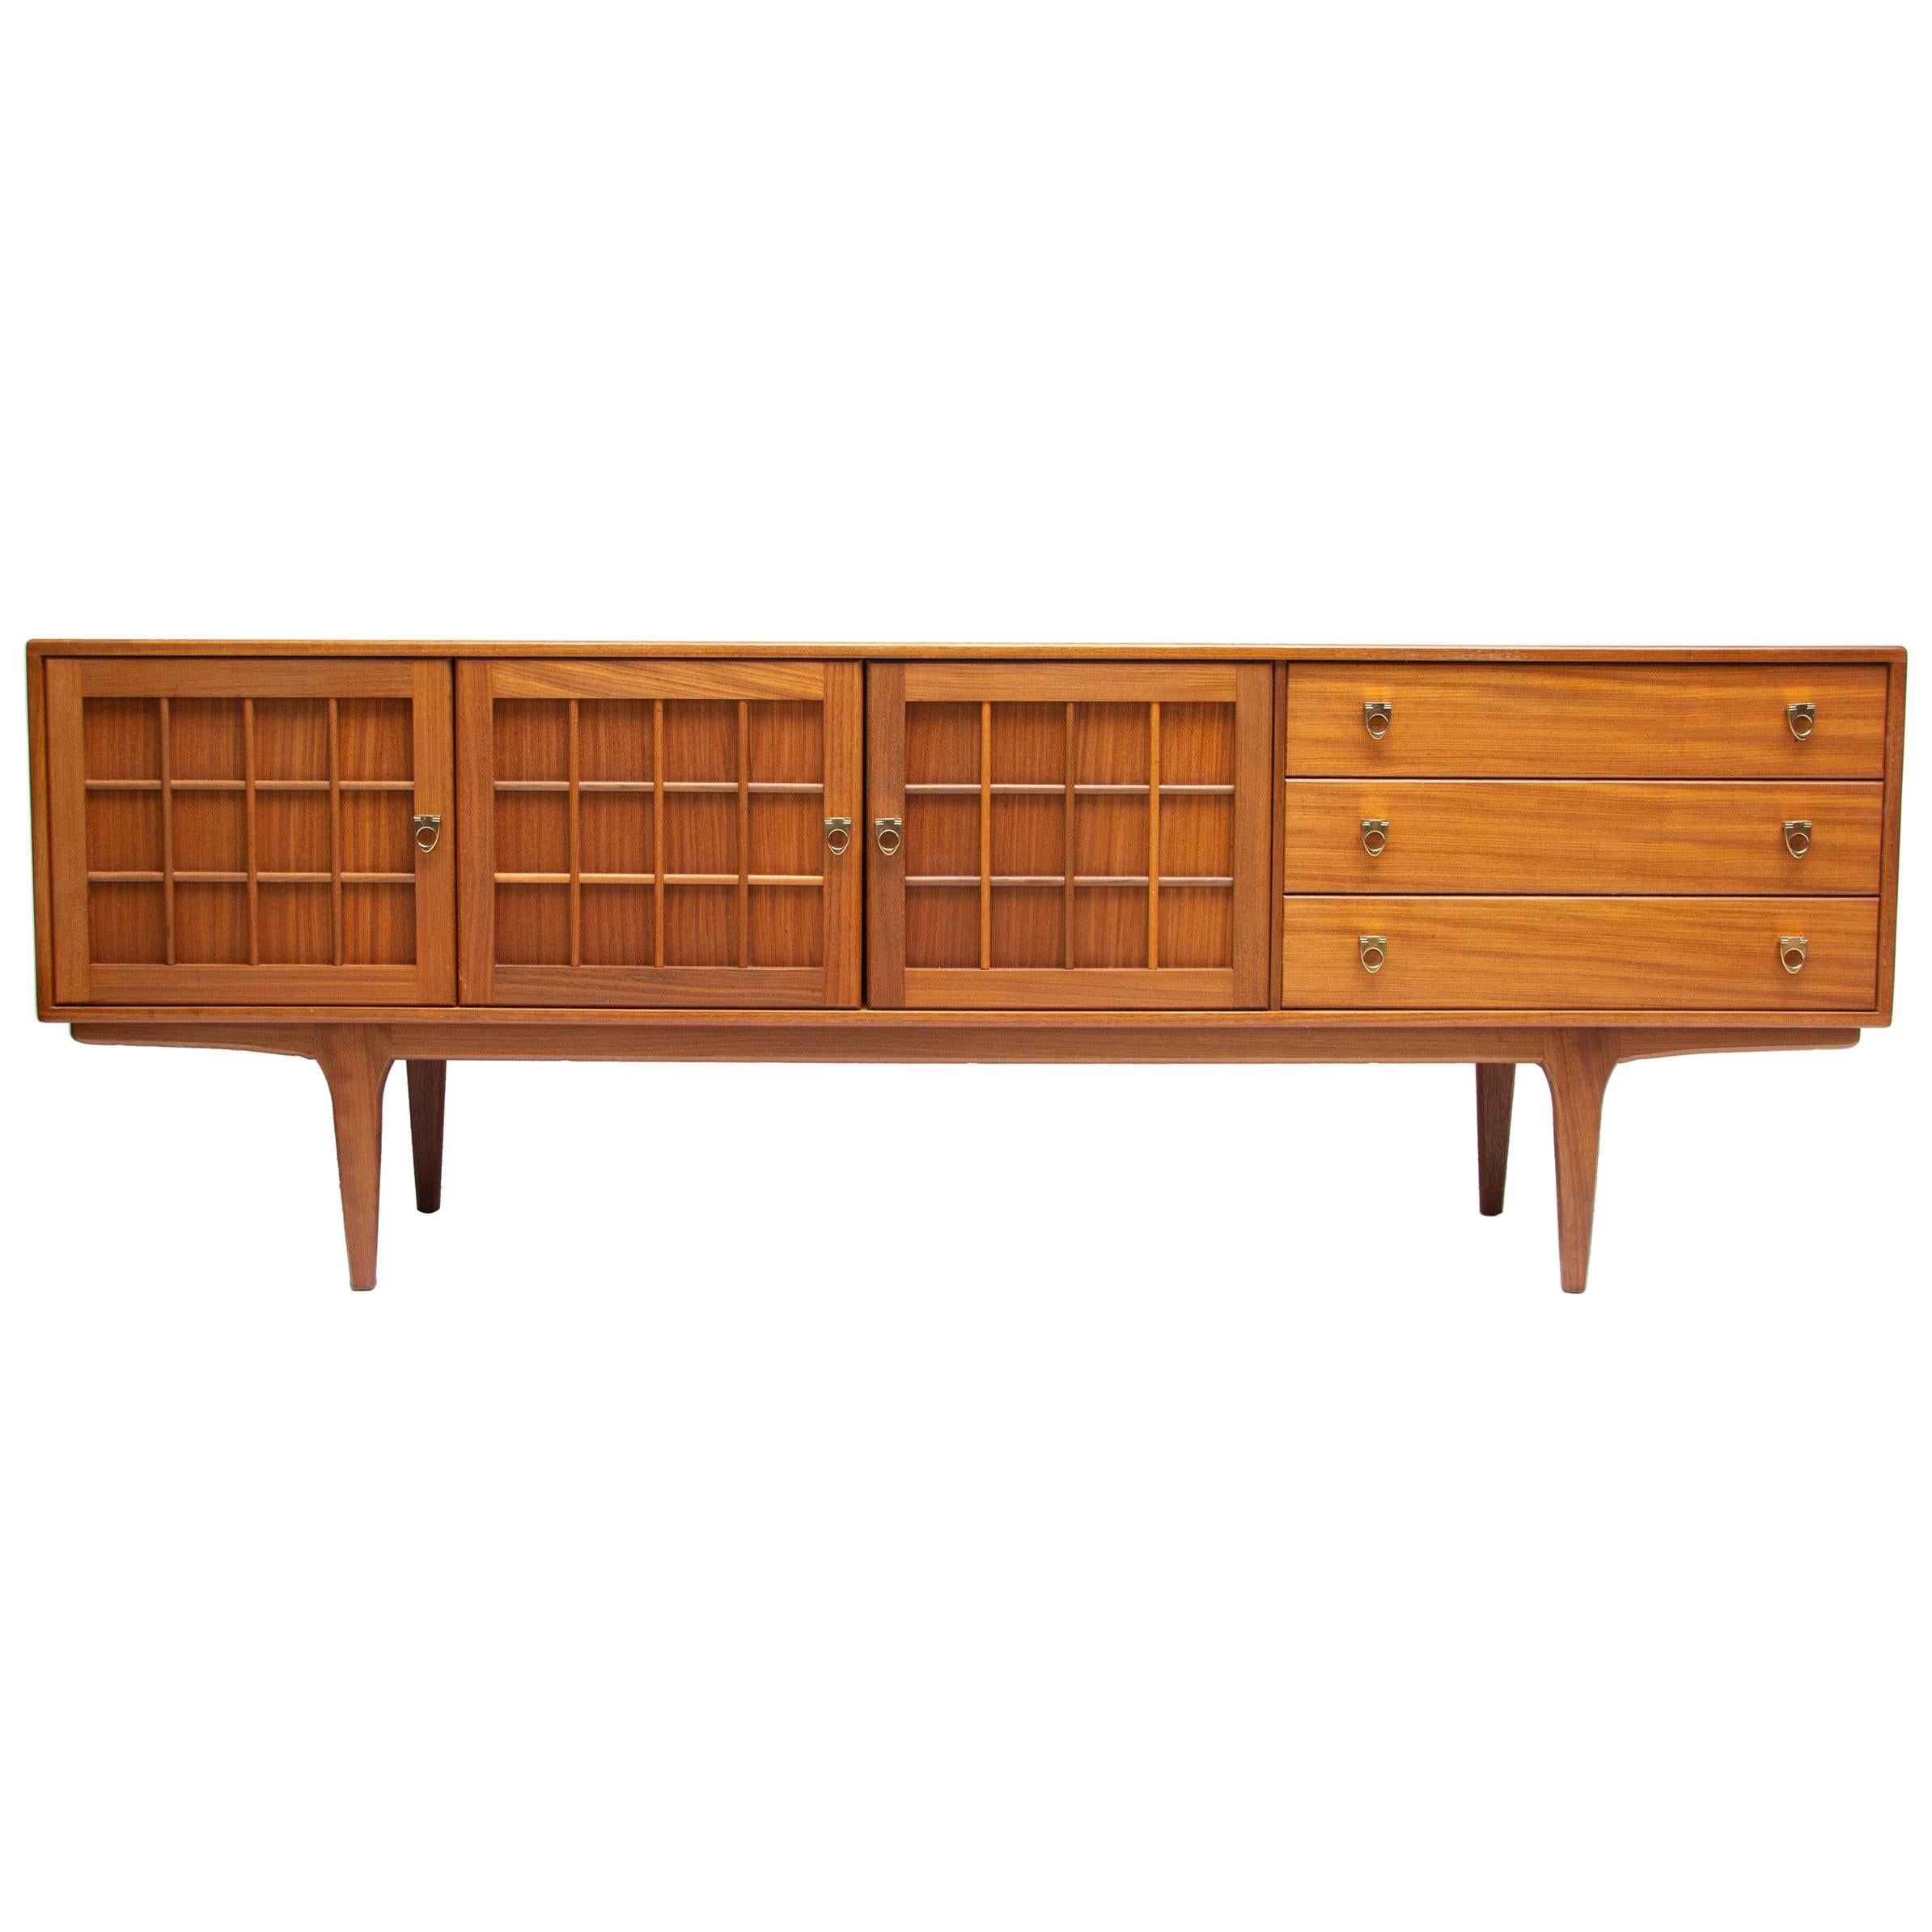 Midcentury teak sideboard credenza by younger